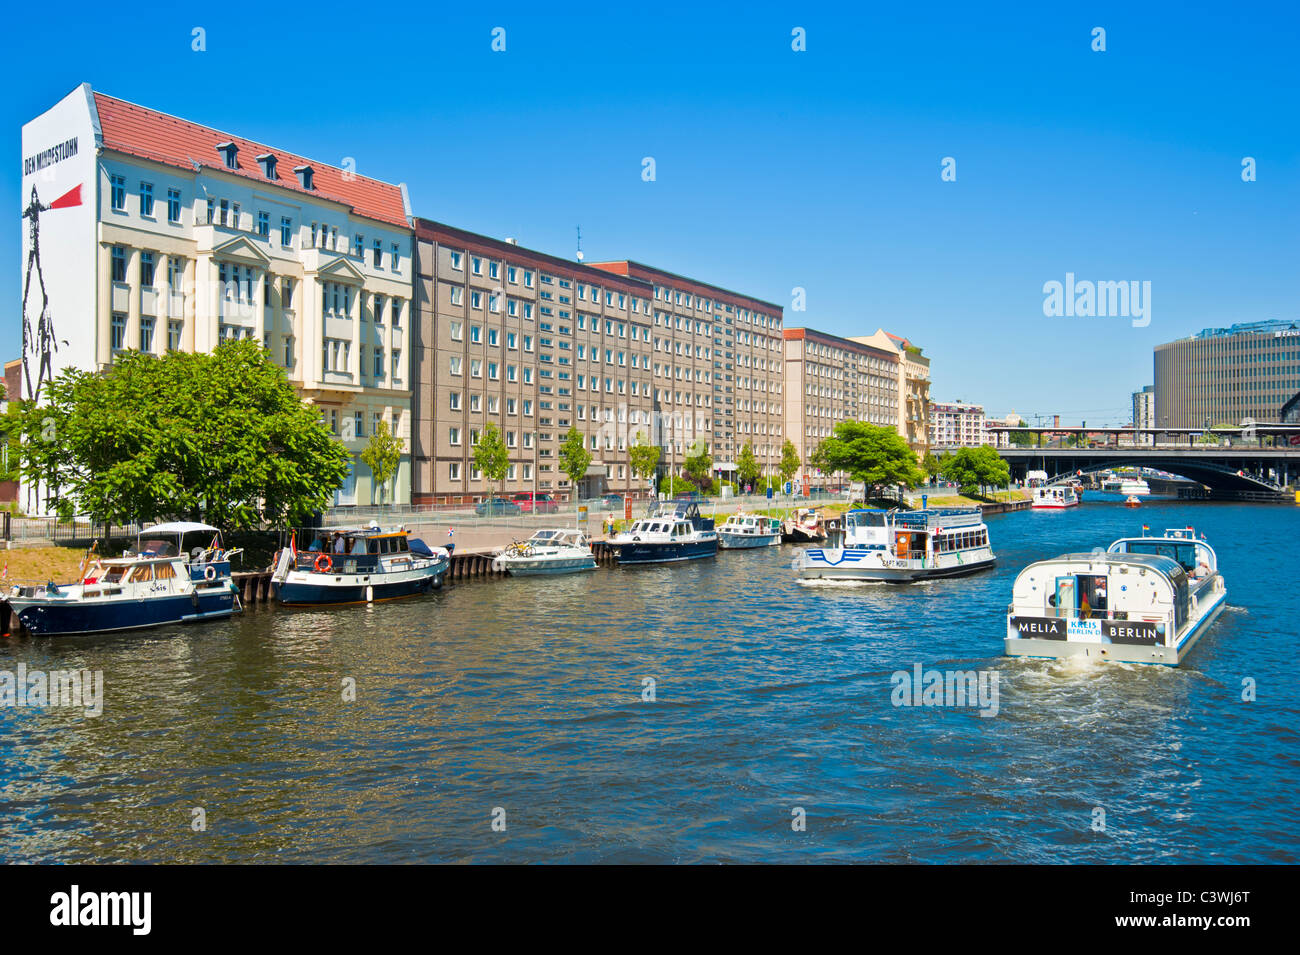 Pleasure boats on river Spree at Berlin Mitte, center of city, Germany Stock Photo